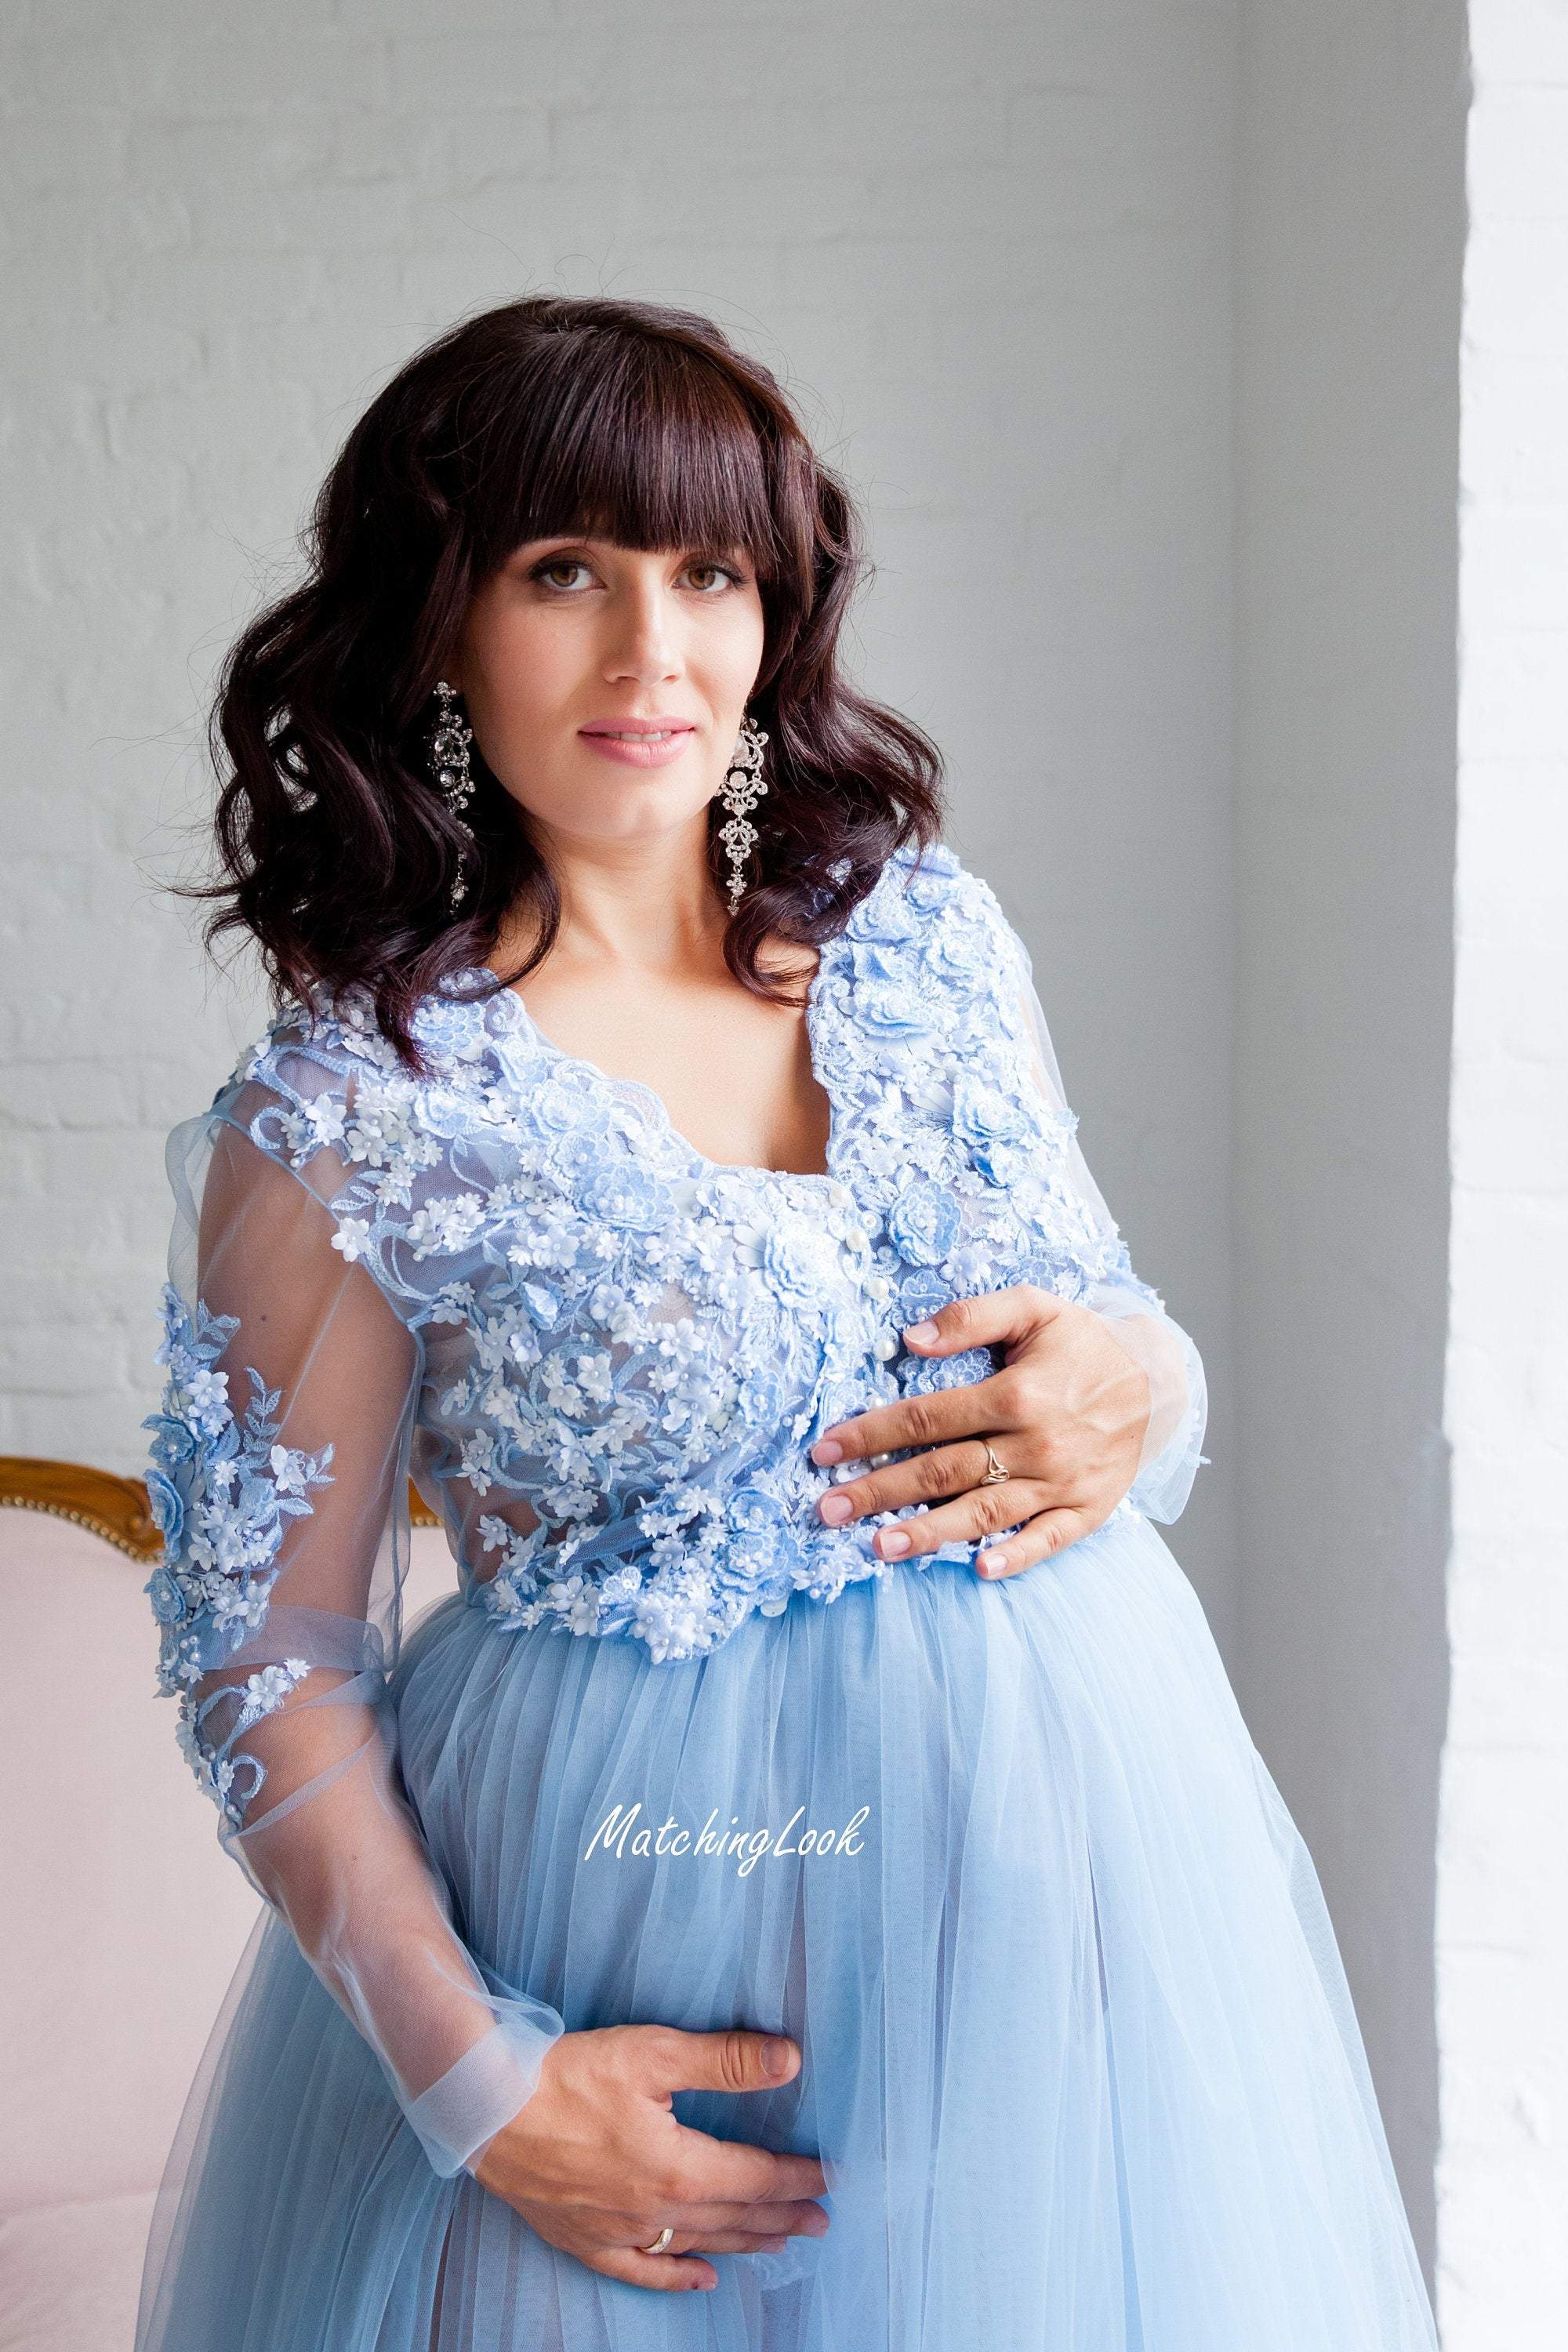 Taryn babyshower maternity dress - Miss Madison Boutique Maternity,  Pregnancy Gowns, Dresses for Photography, Photoshoot, Bridesmaid, Babyshower